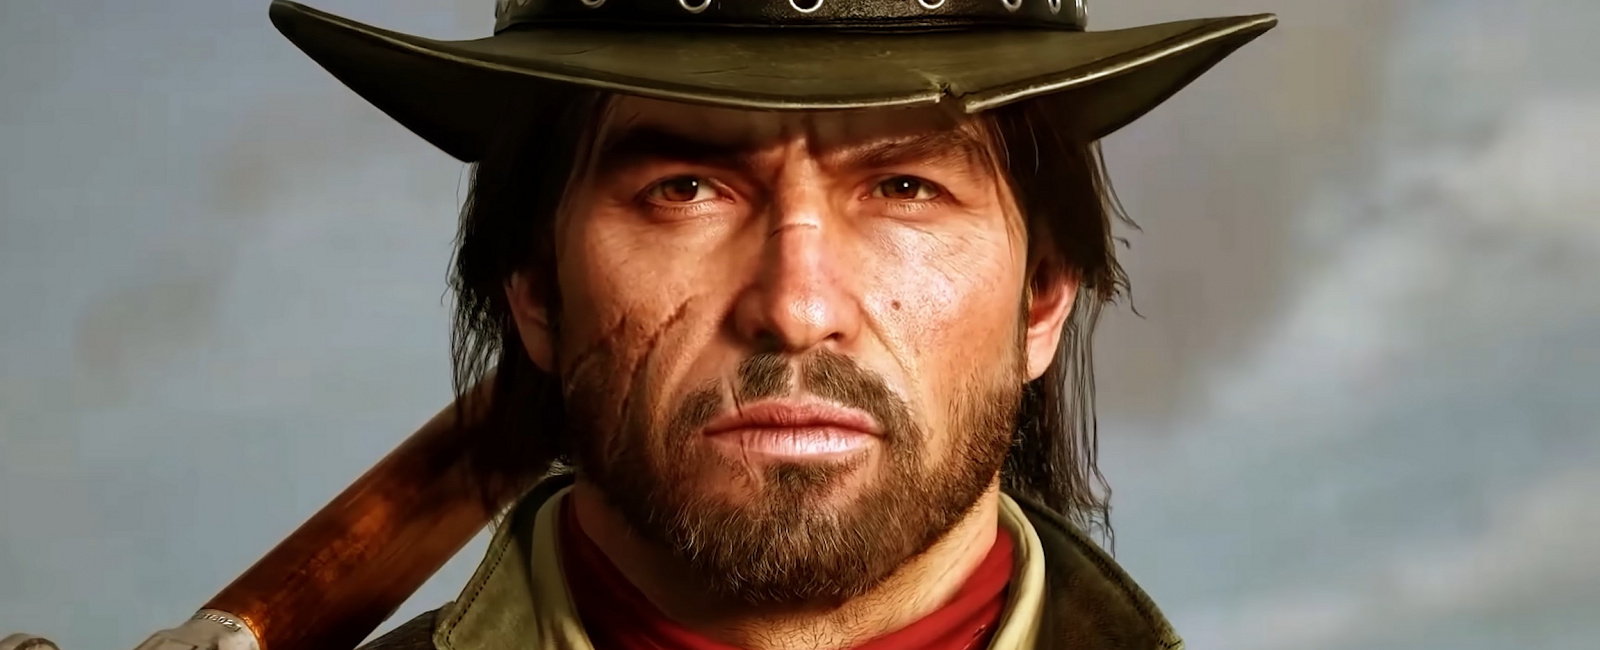 Red Dead Redemption fans get the remake they've been pining for in this  fan-made Unreal Engine 5 trailer